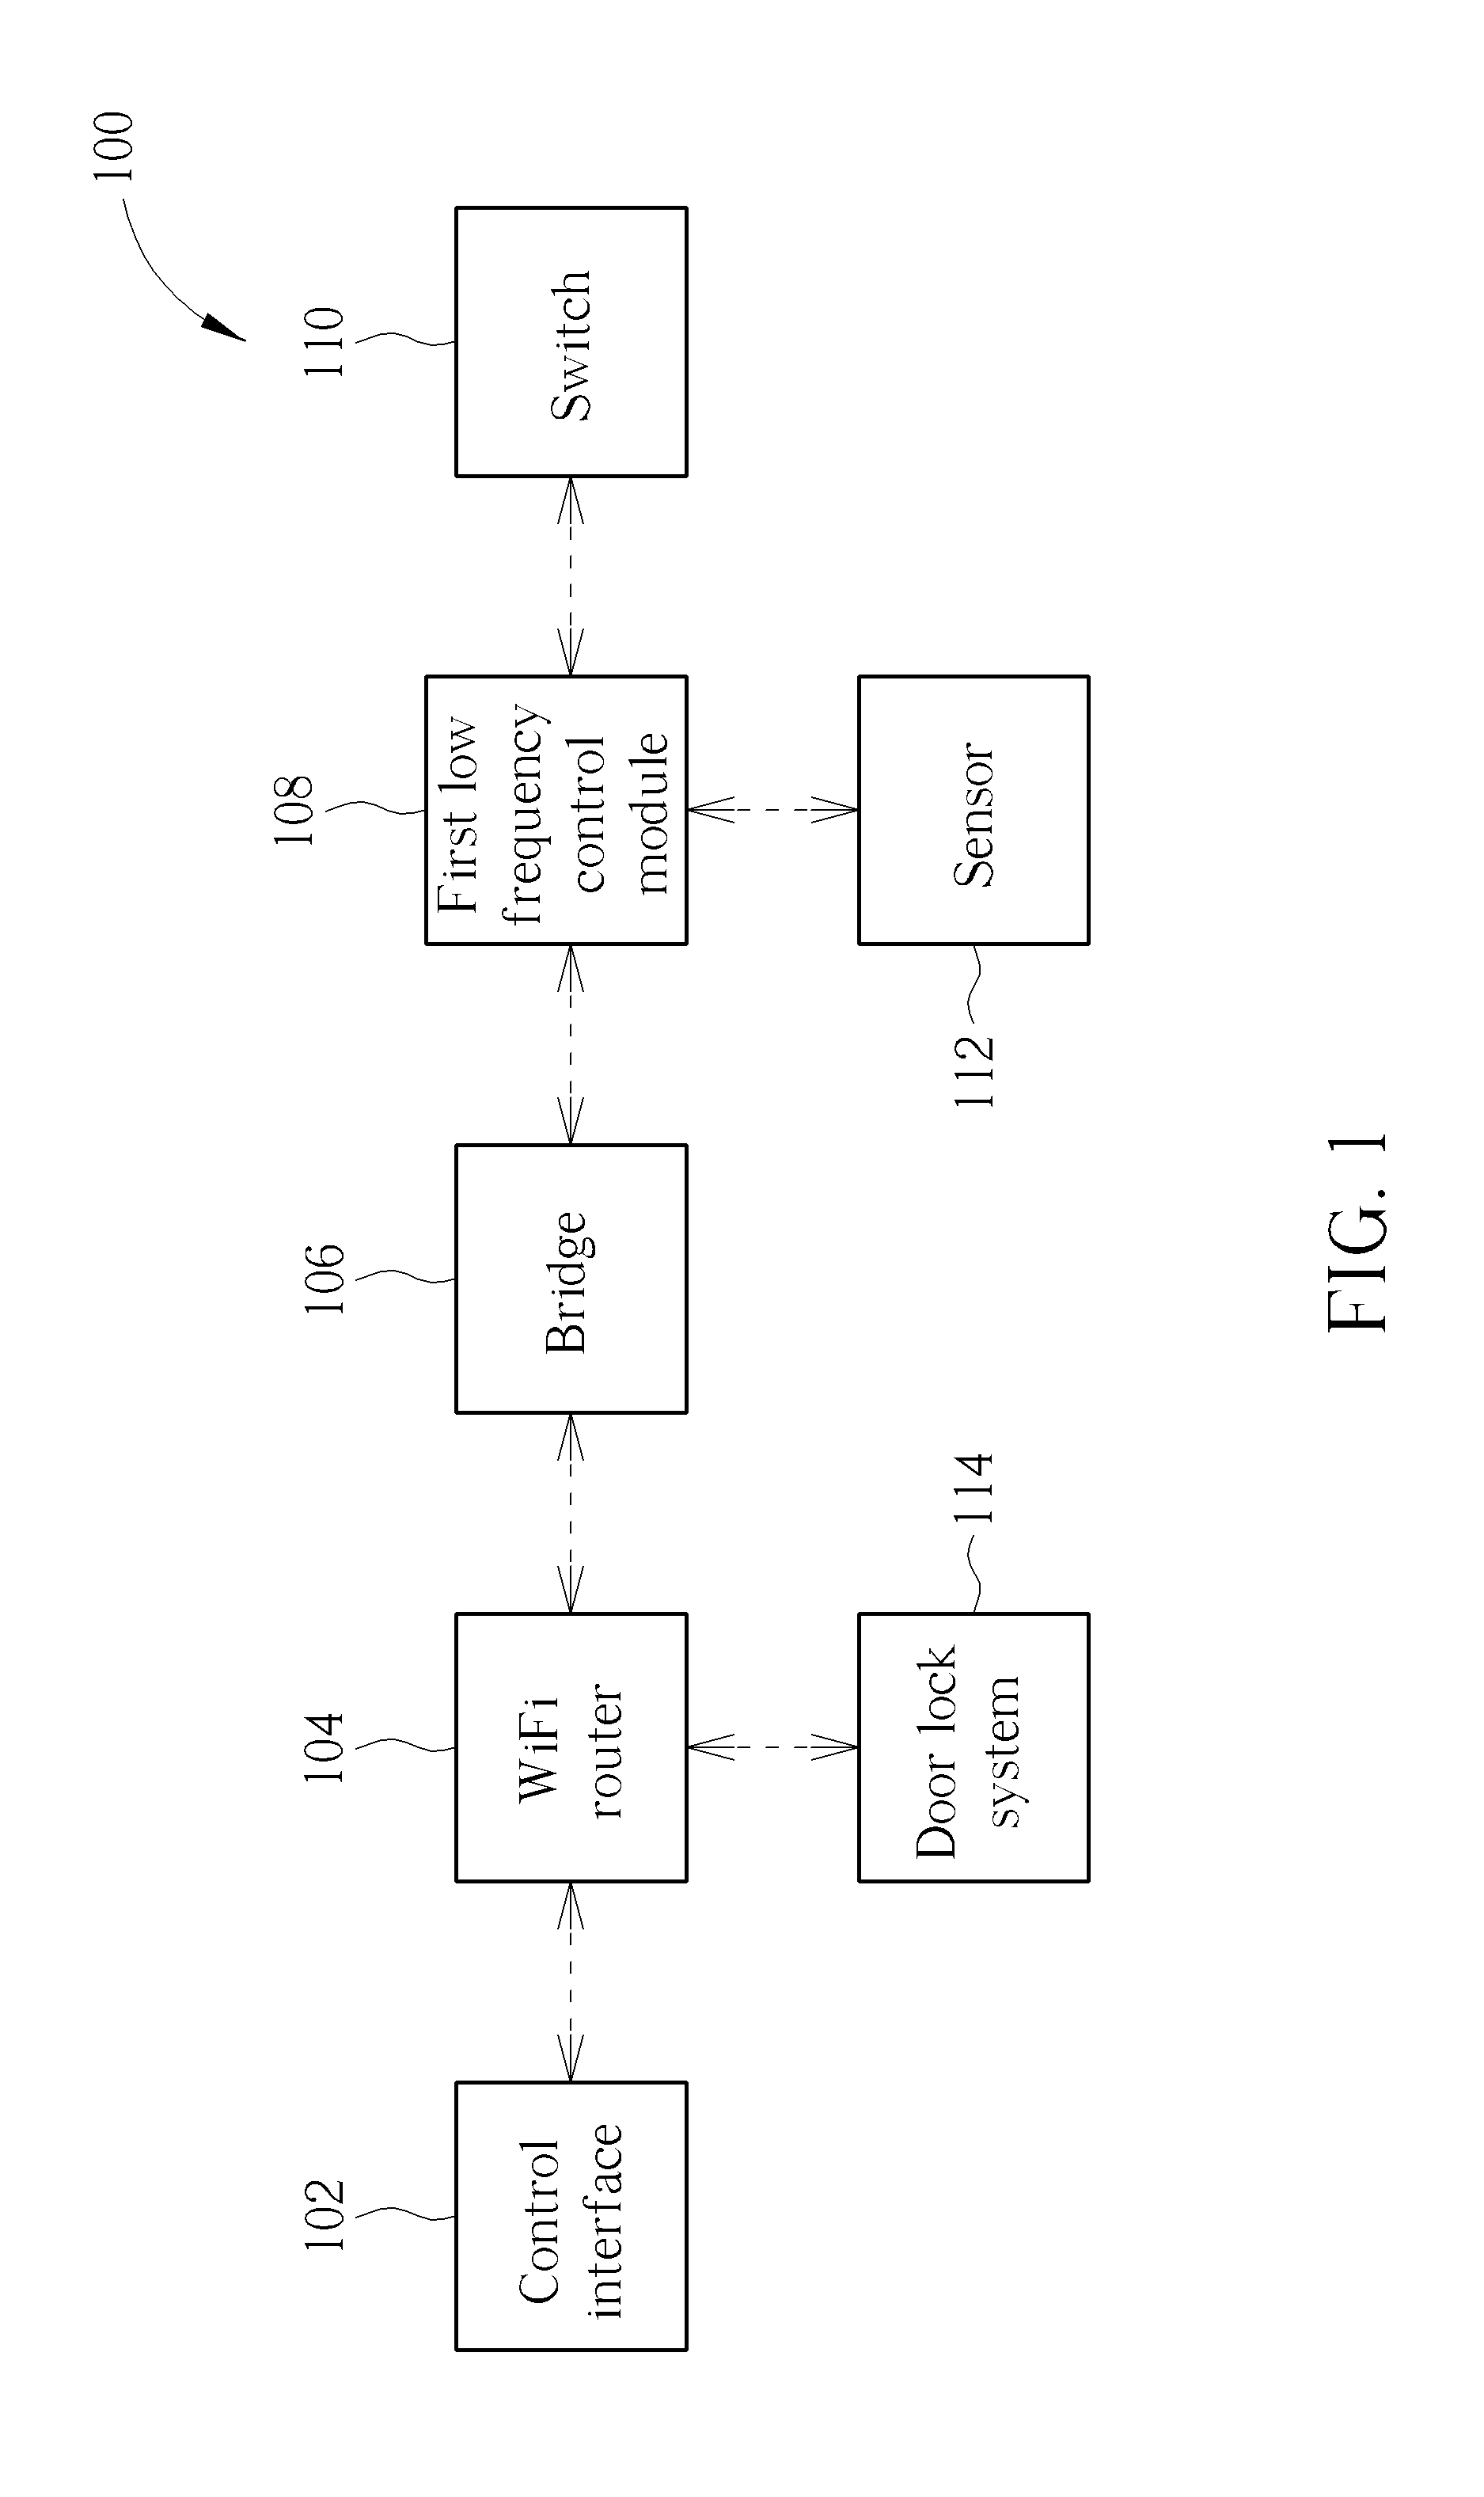 Remote control system having a communication frequency lower than wireless fidelity signals